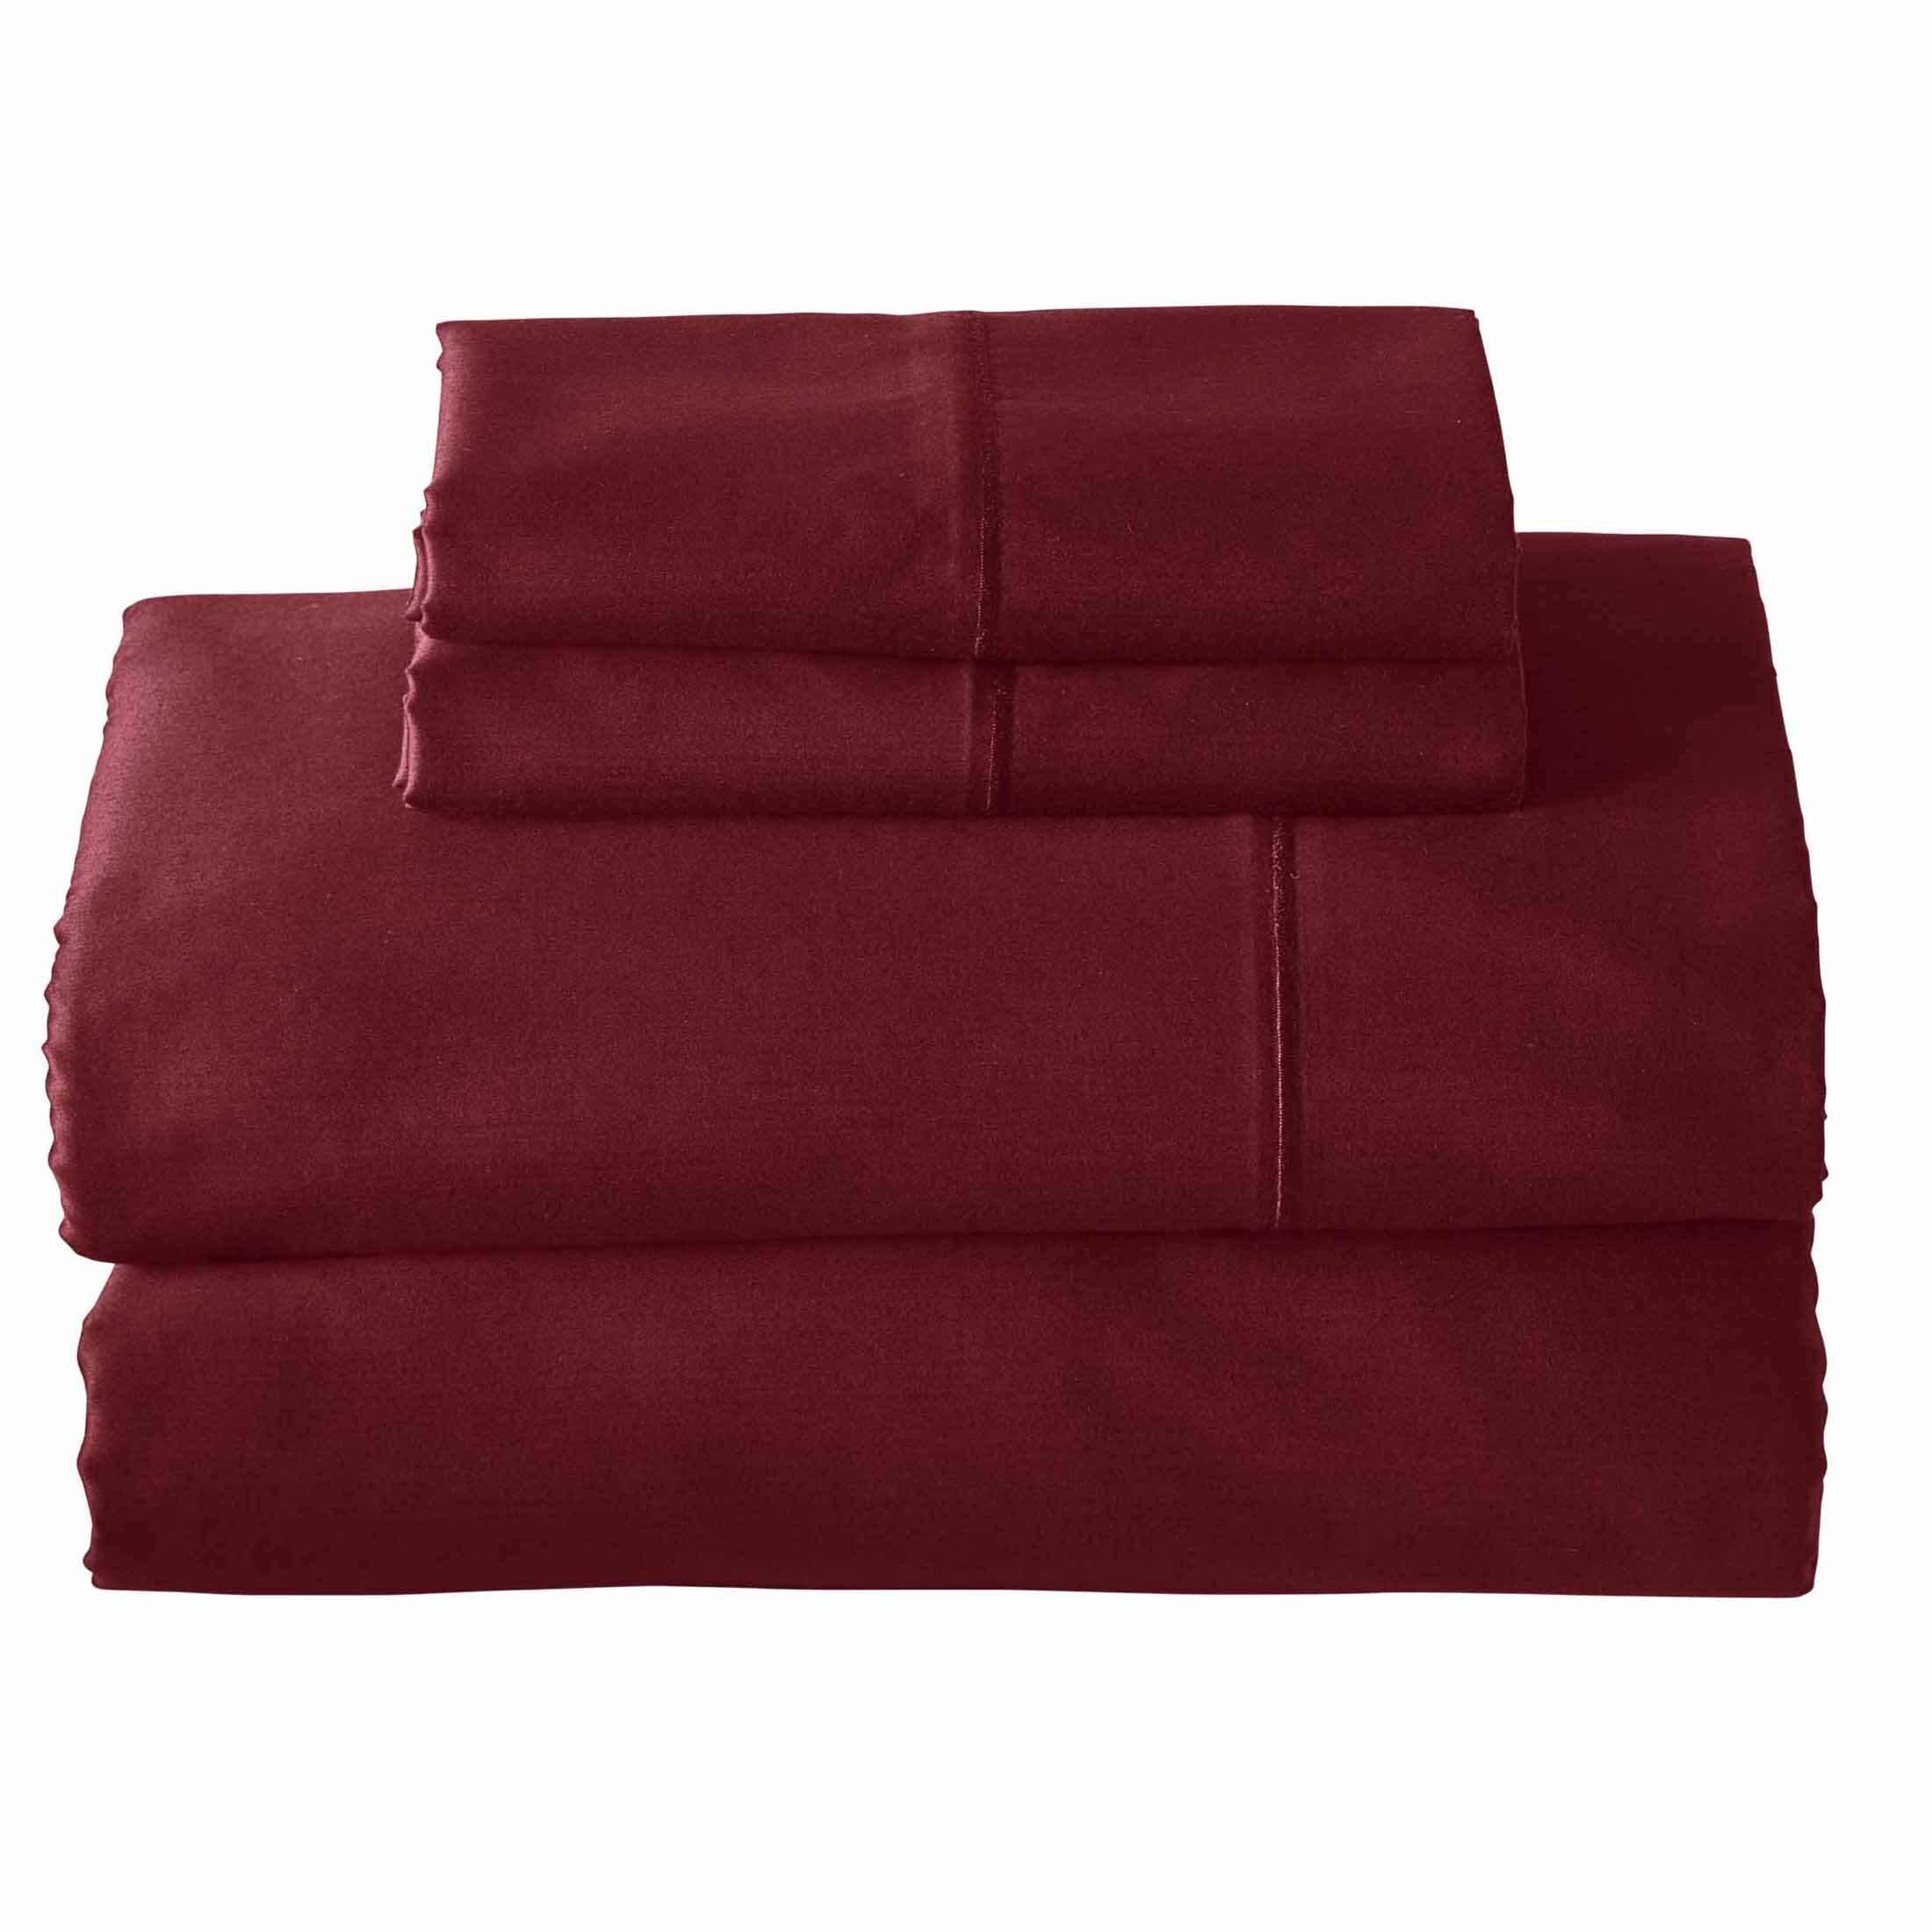 Better Homes & Gardens 3-Piece 400 Thread Count Deep Redwood Performance Hygro Cotton Sheet Set, Twin - image 5 of 6